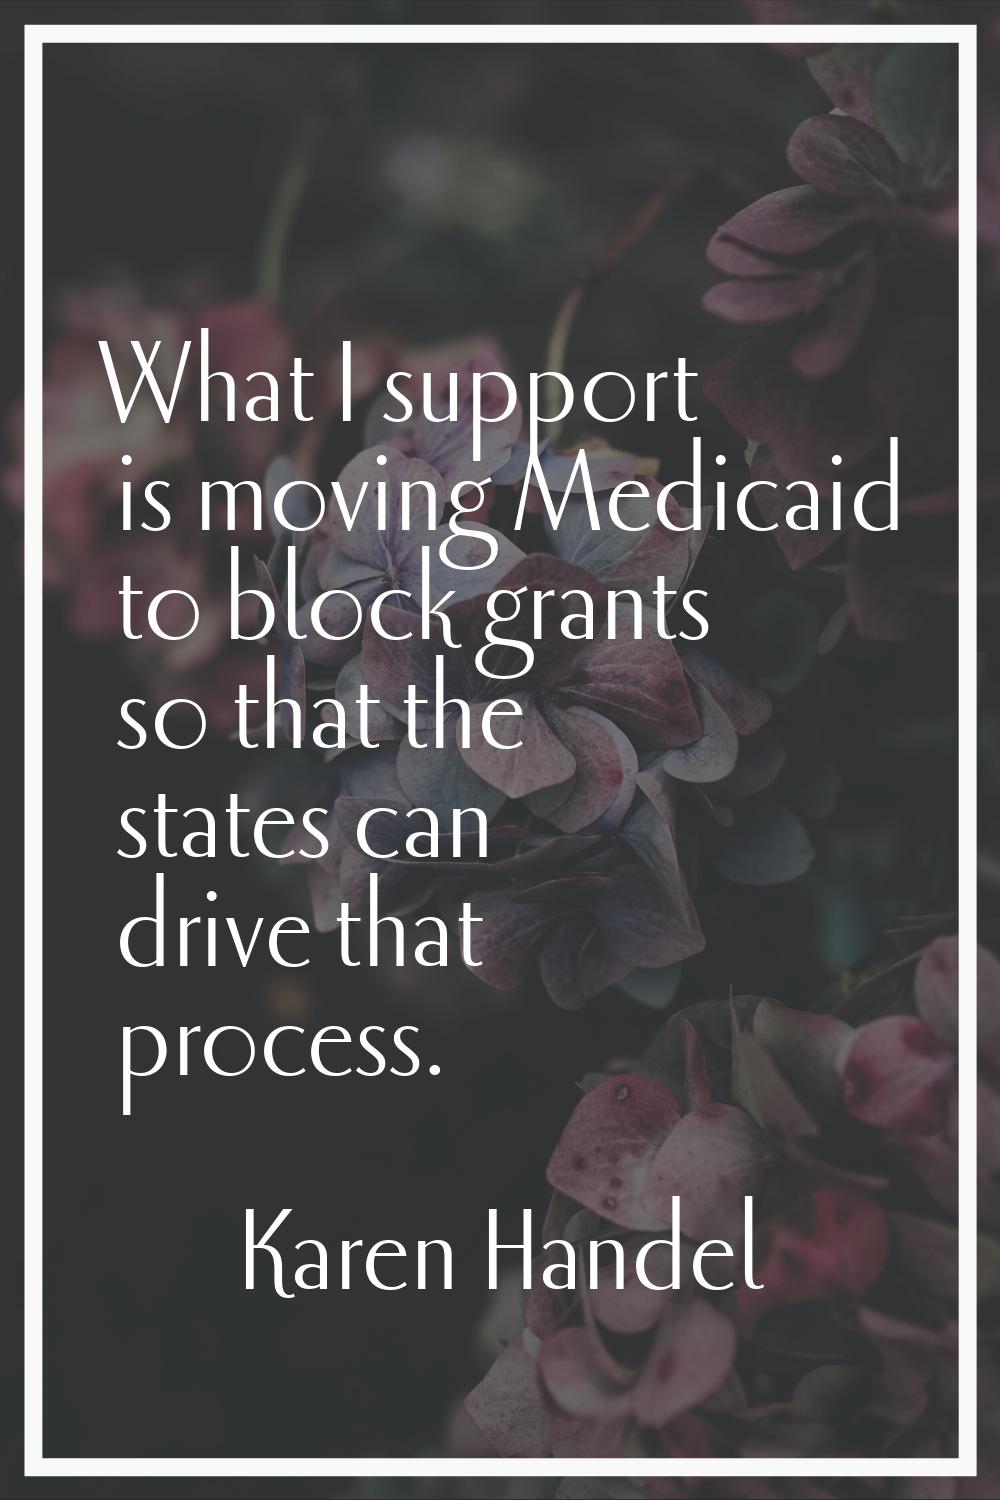 What I support is moving Medicaid to block grants so that the states can drive that process.